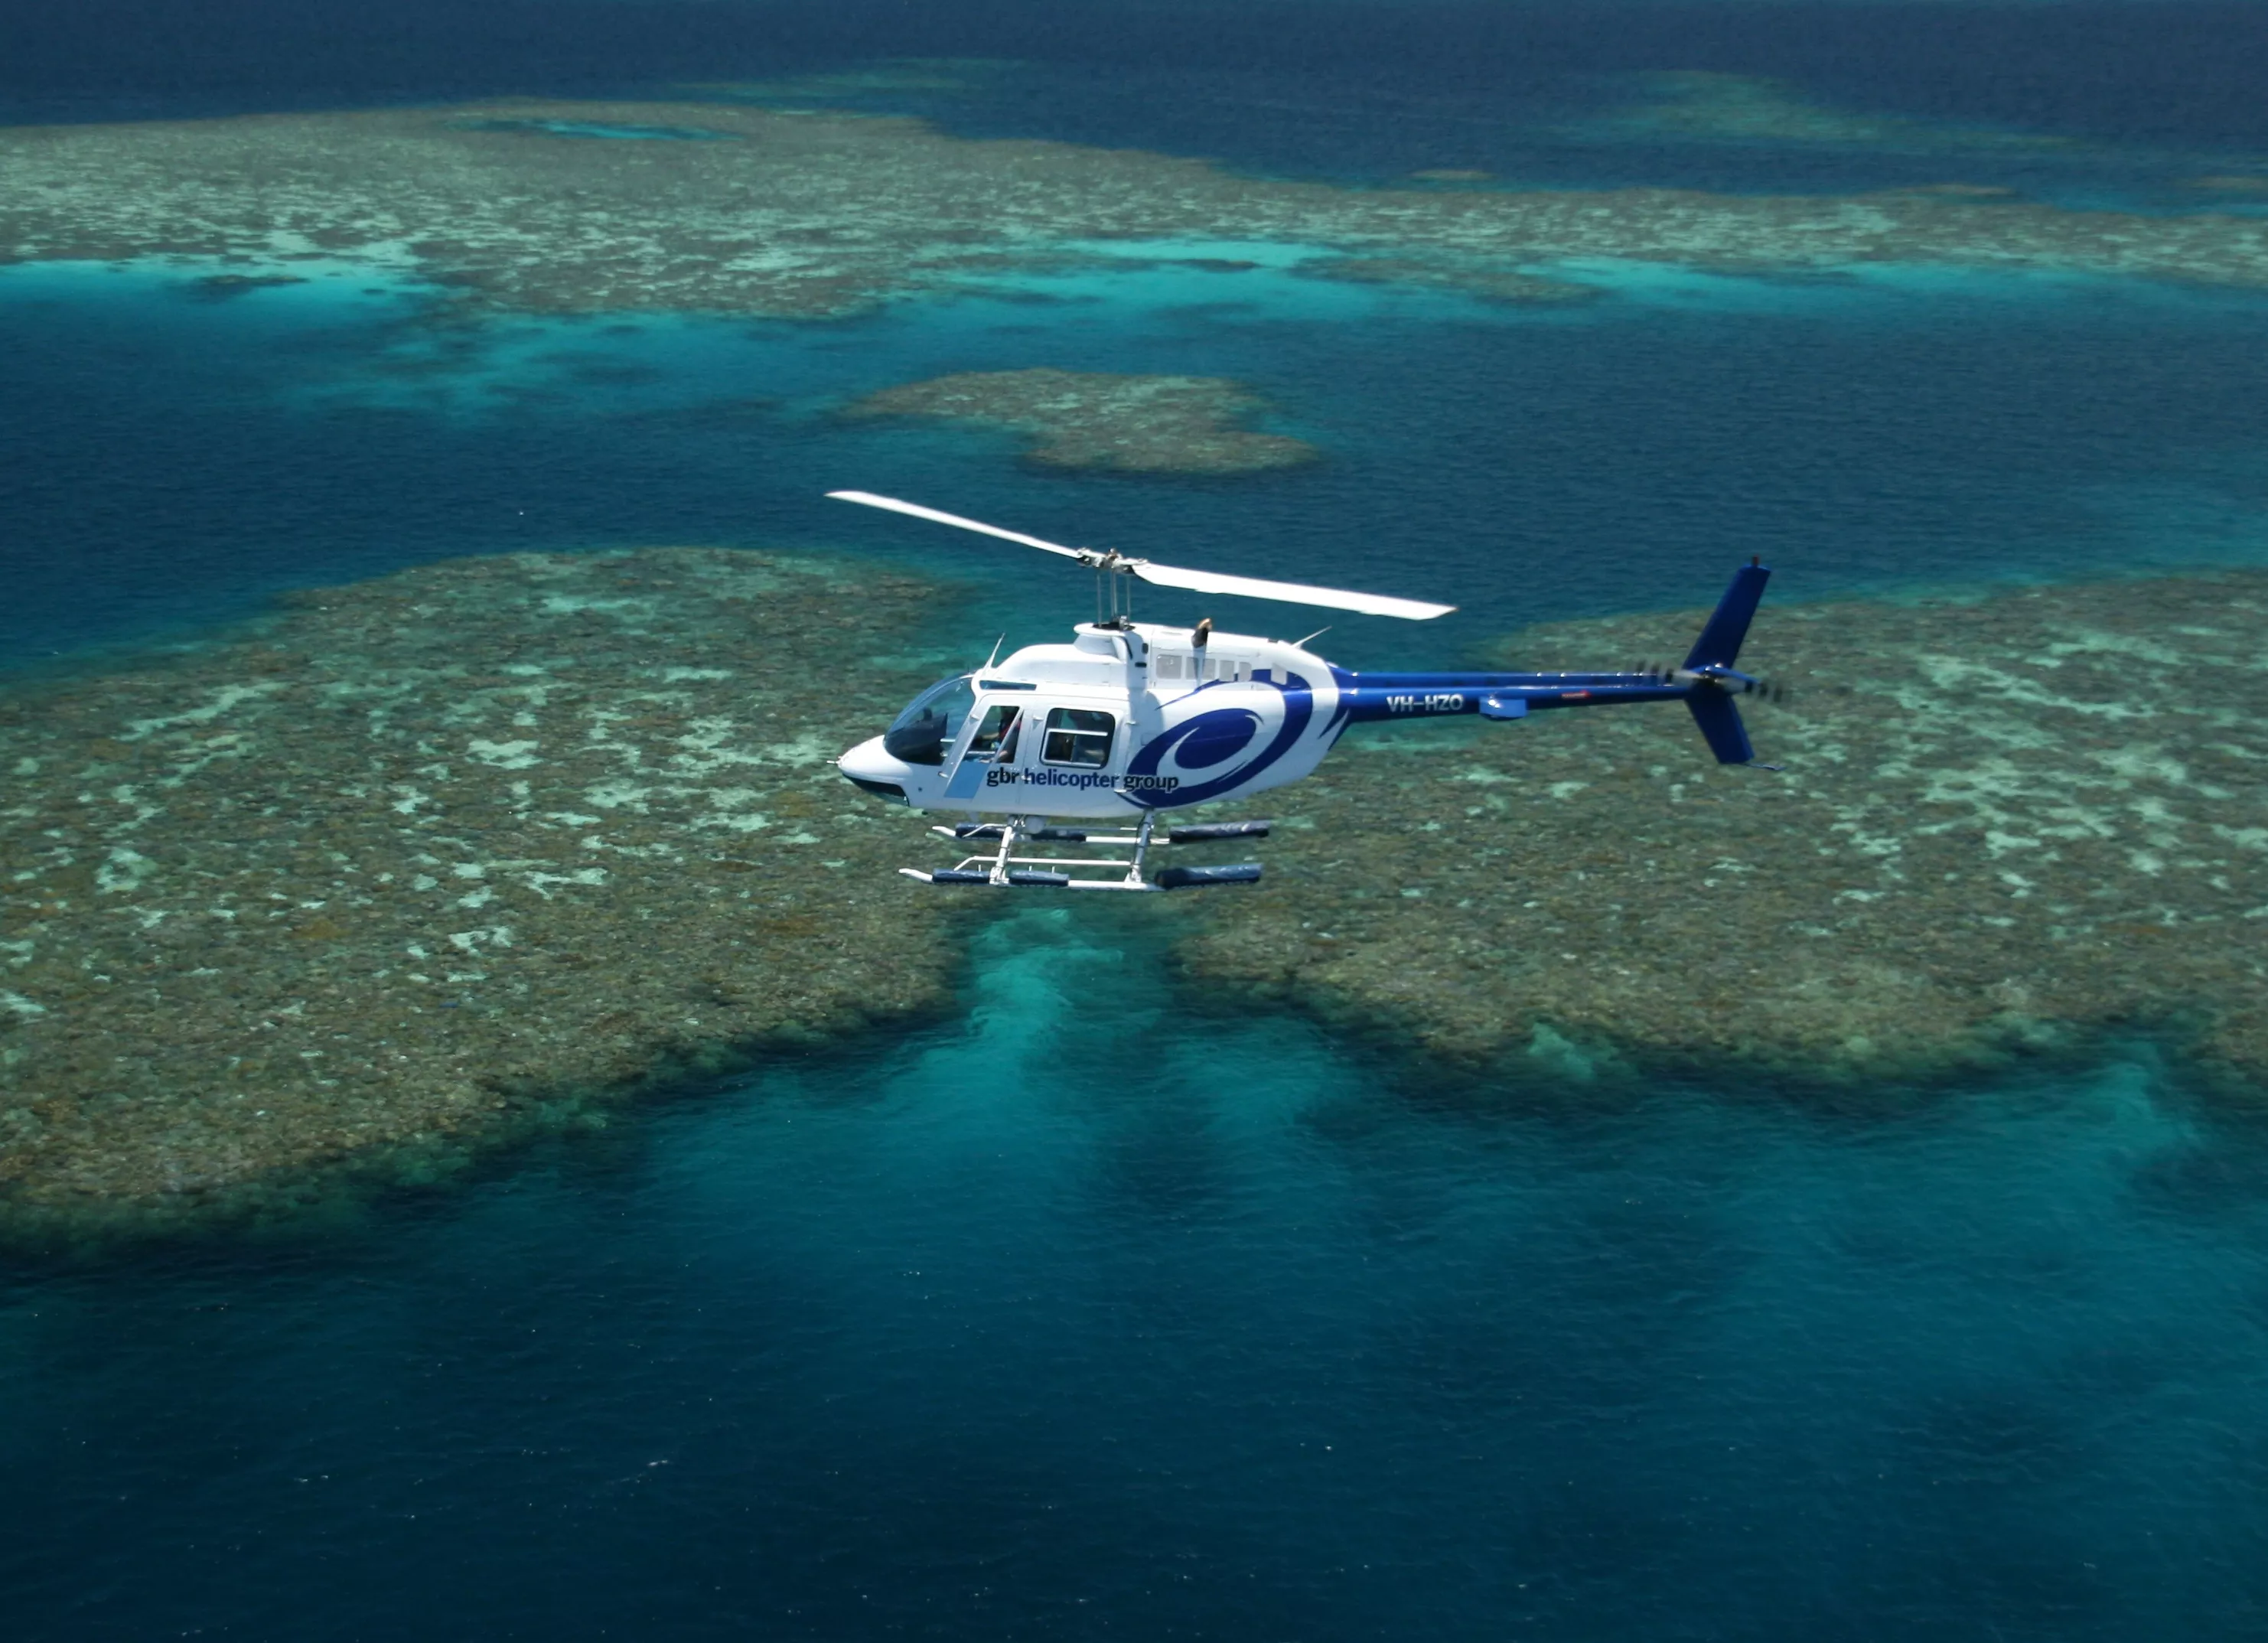 GBR Helicopters in Australia, Australia and Oceania | Helicopter Sport - Rated 4.3